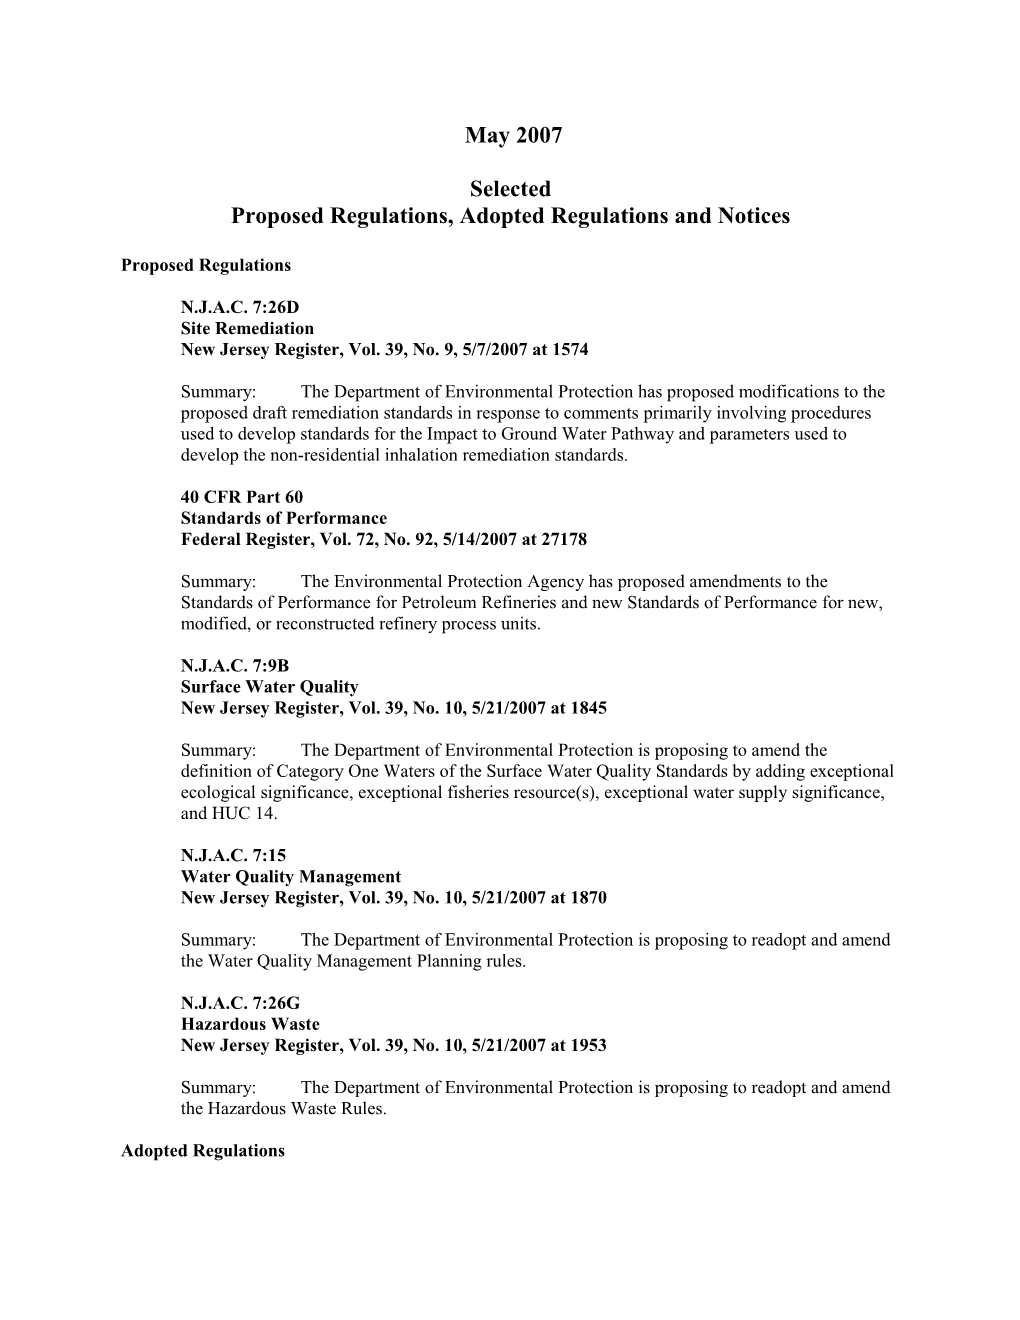 Proposed Regulations, Adopted Regulations and Notices